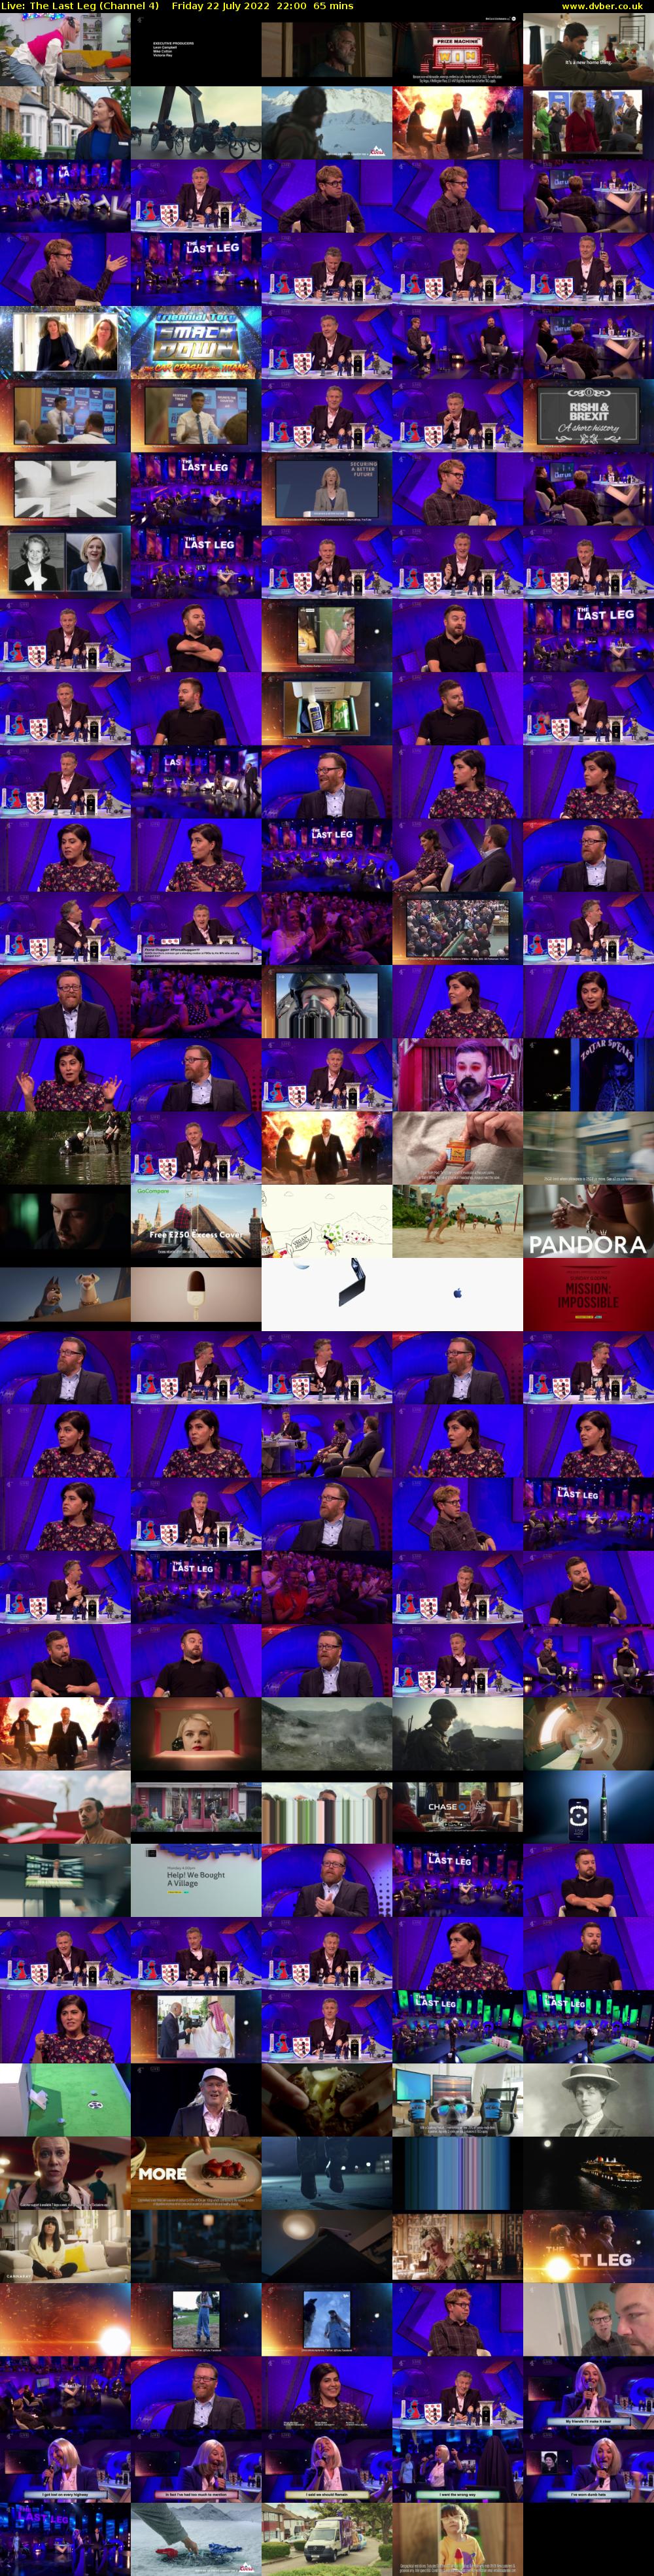 Live: The Last Leg (Channel 4) Friday 22 July 2022 22:00 - 23:05